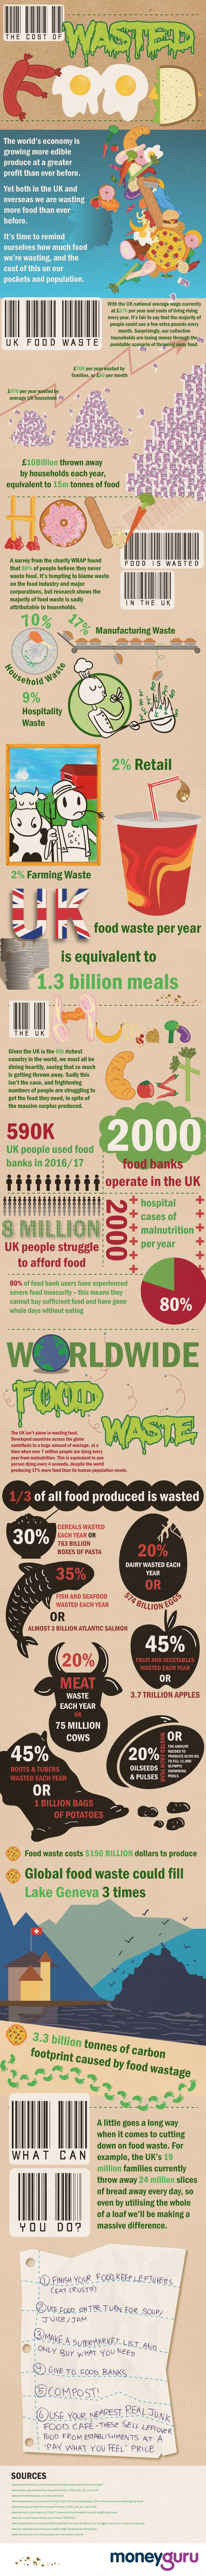 Cost of Wasted Food Infographic